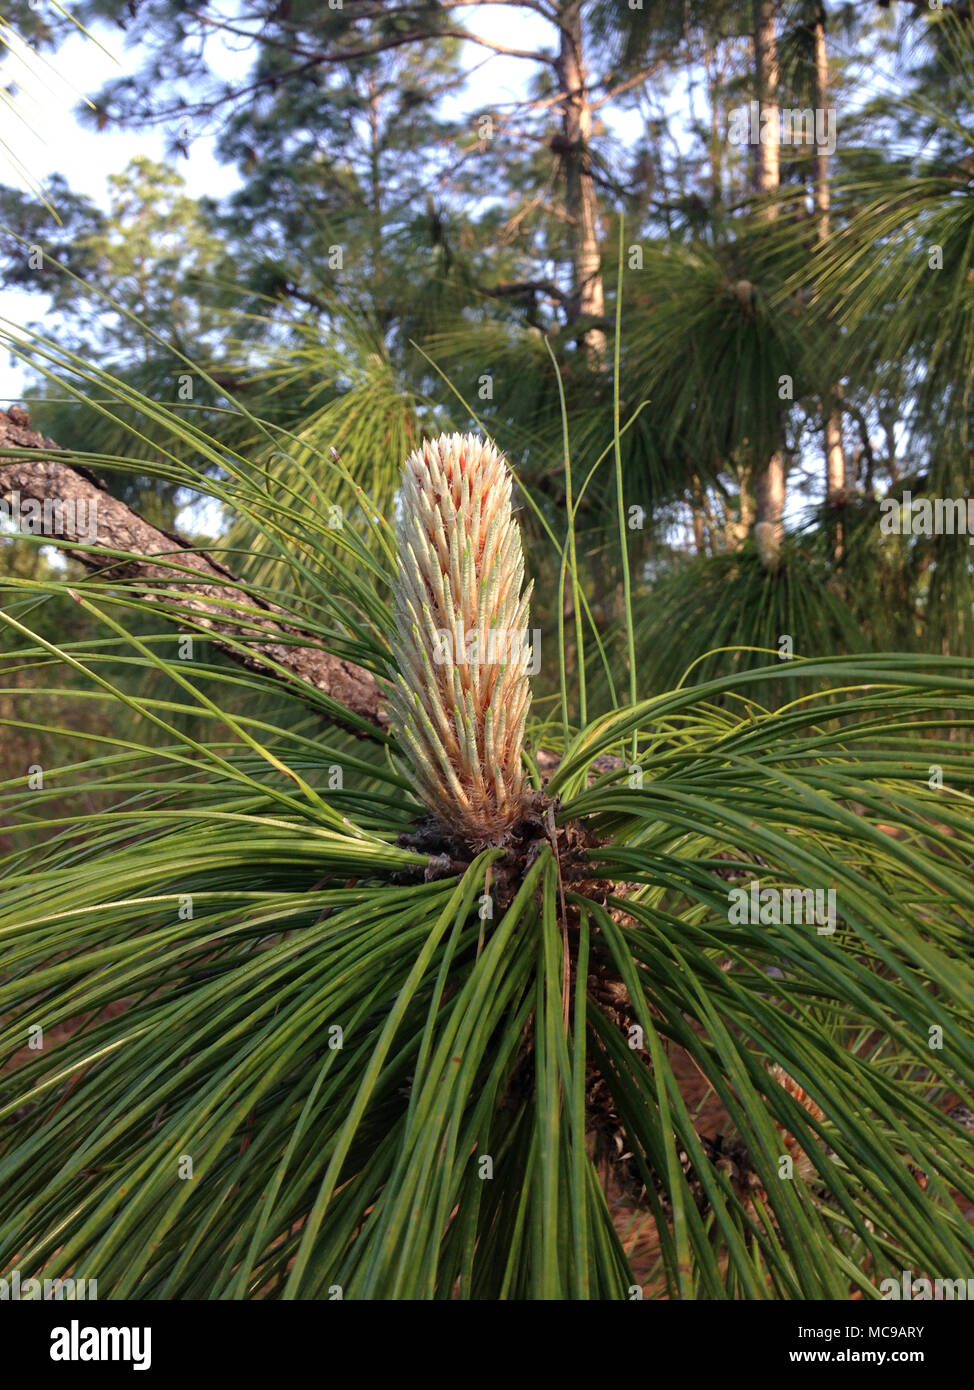 Young, developing pine cone of the Florida Slash Pne tree. Stock Photo